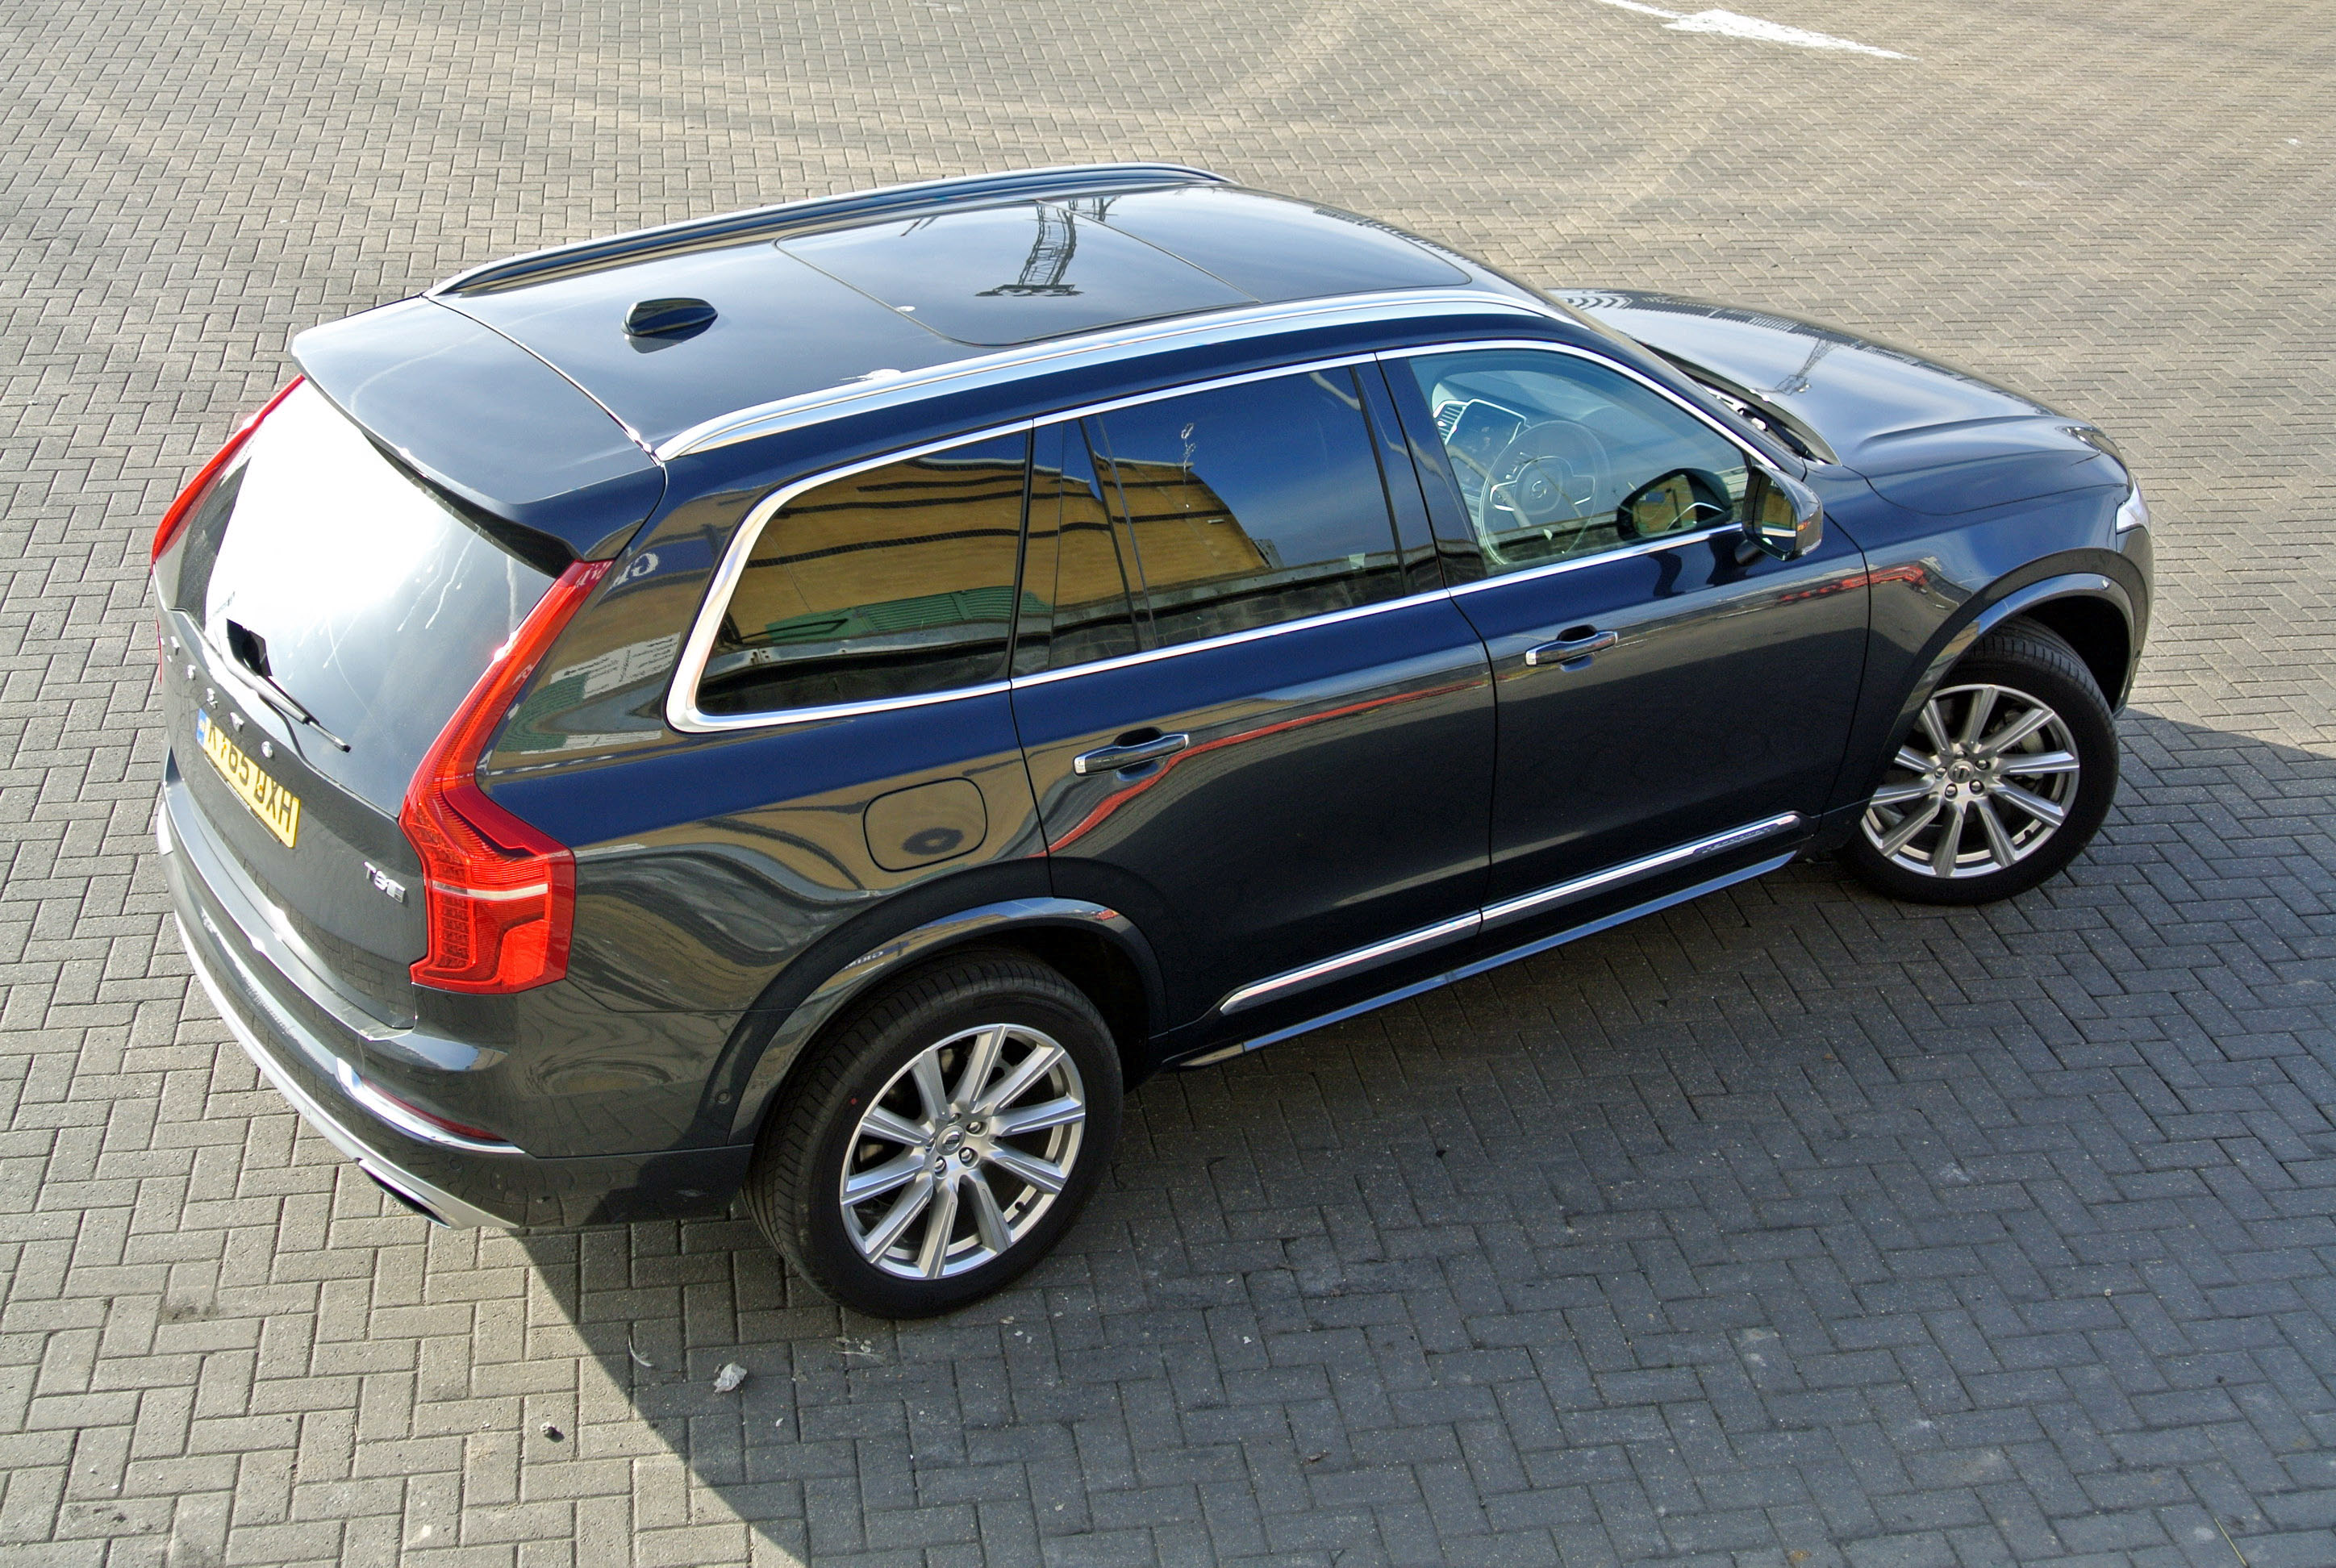 Twin-power boosts both class and potency for Volvo XC90